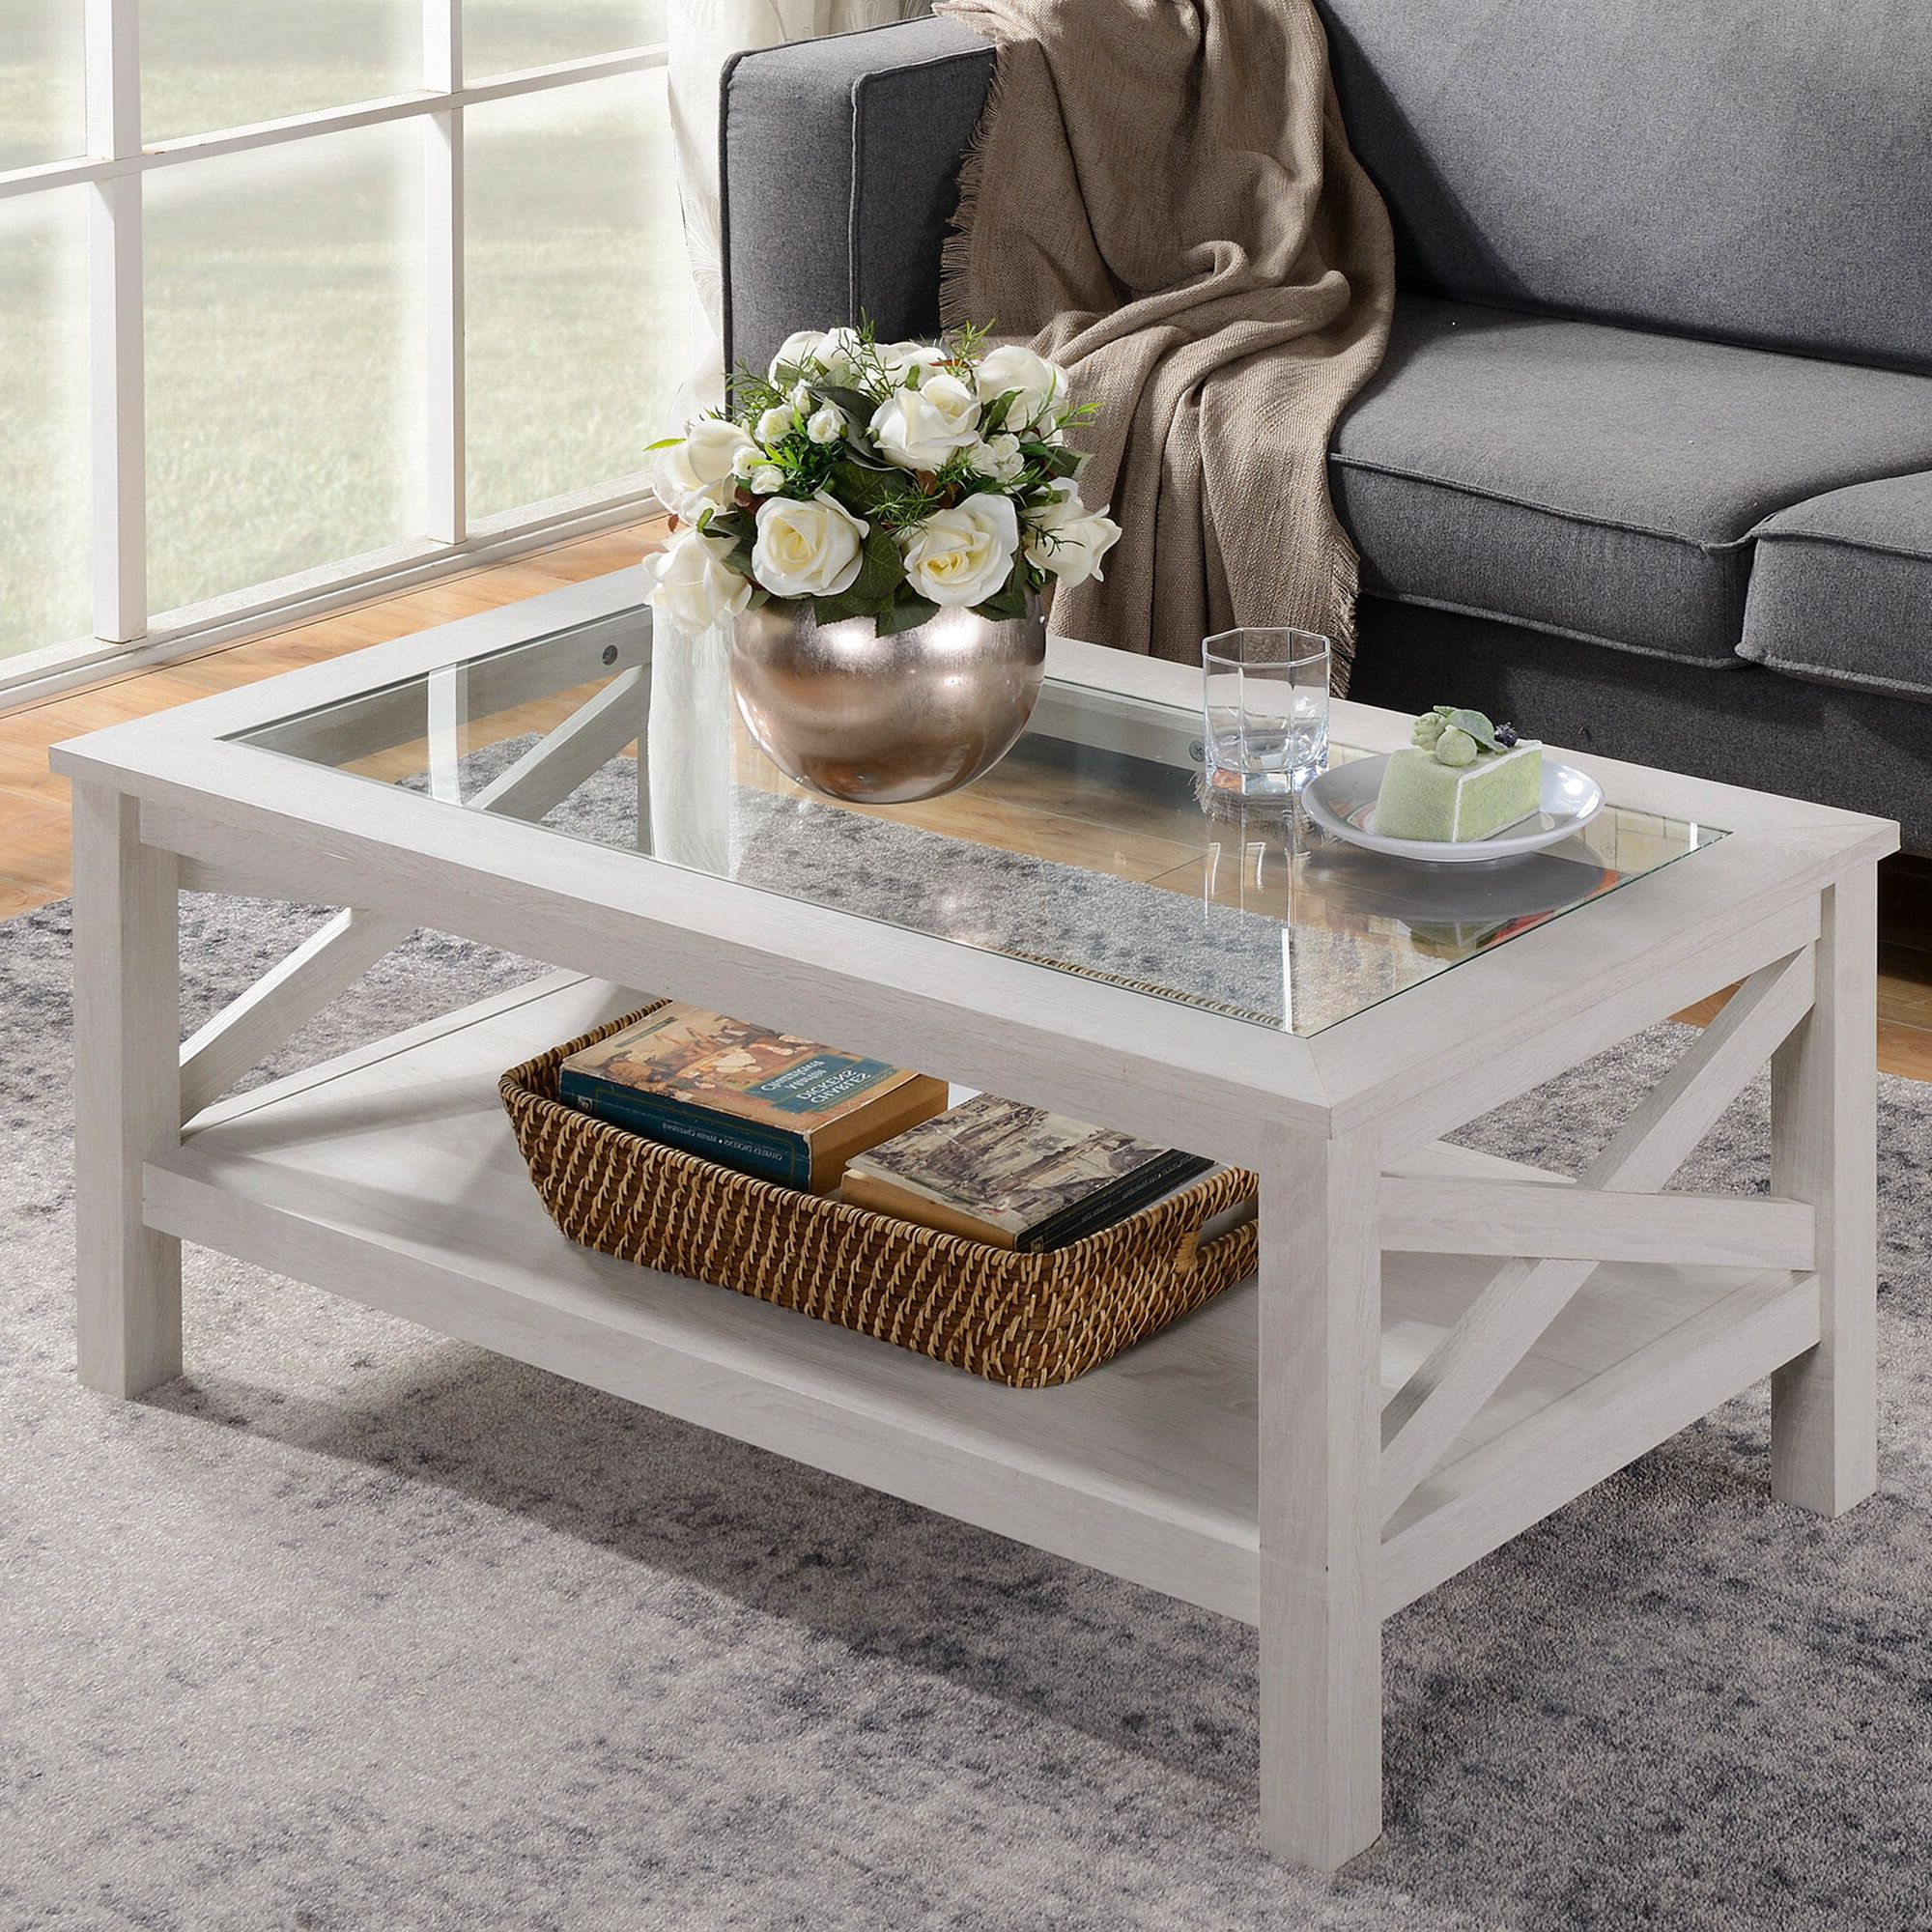 Popular Smooth Top Coffee Tables Intended For Gracie Oaks Espinet Traditional Coffee Table With Wood Frame, Tempered Glass  Tabletop And Underneath Storage Shelf, White Oak & Reviews (View 12 of 20)